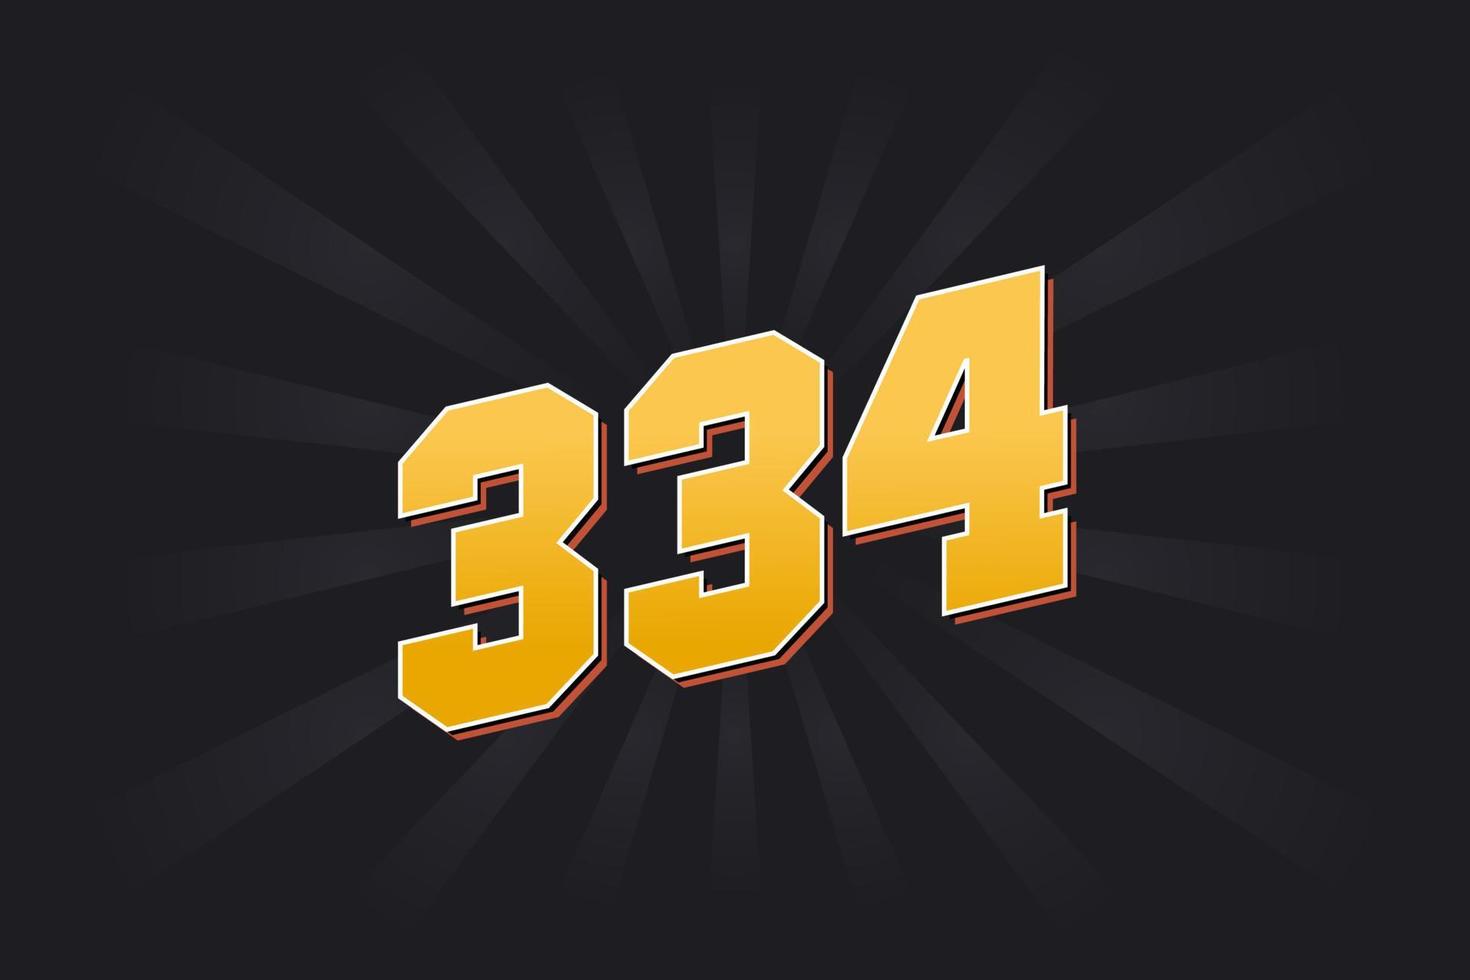 number-334-vector-font-alphabet-yellow-334-number-with-black